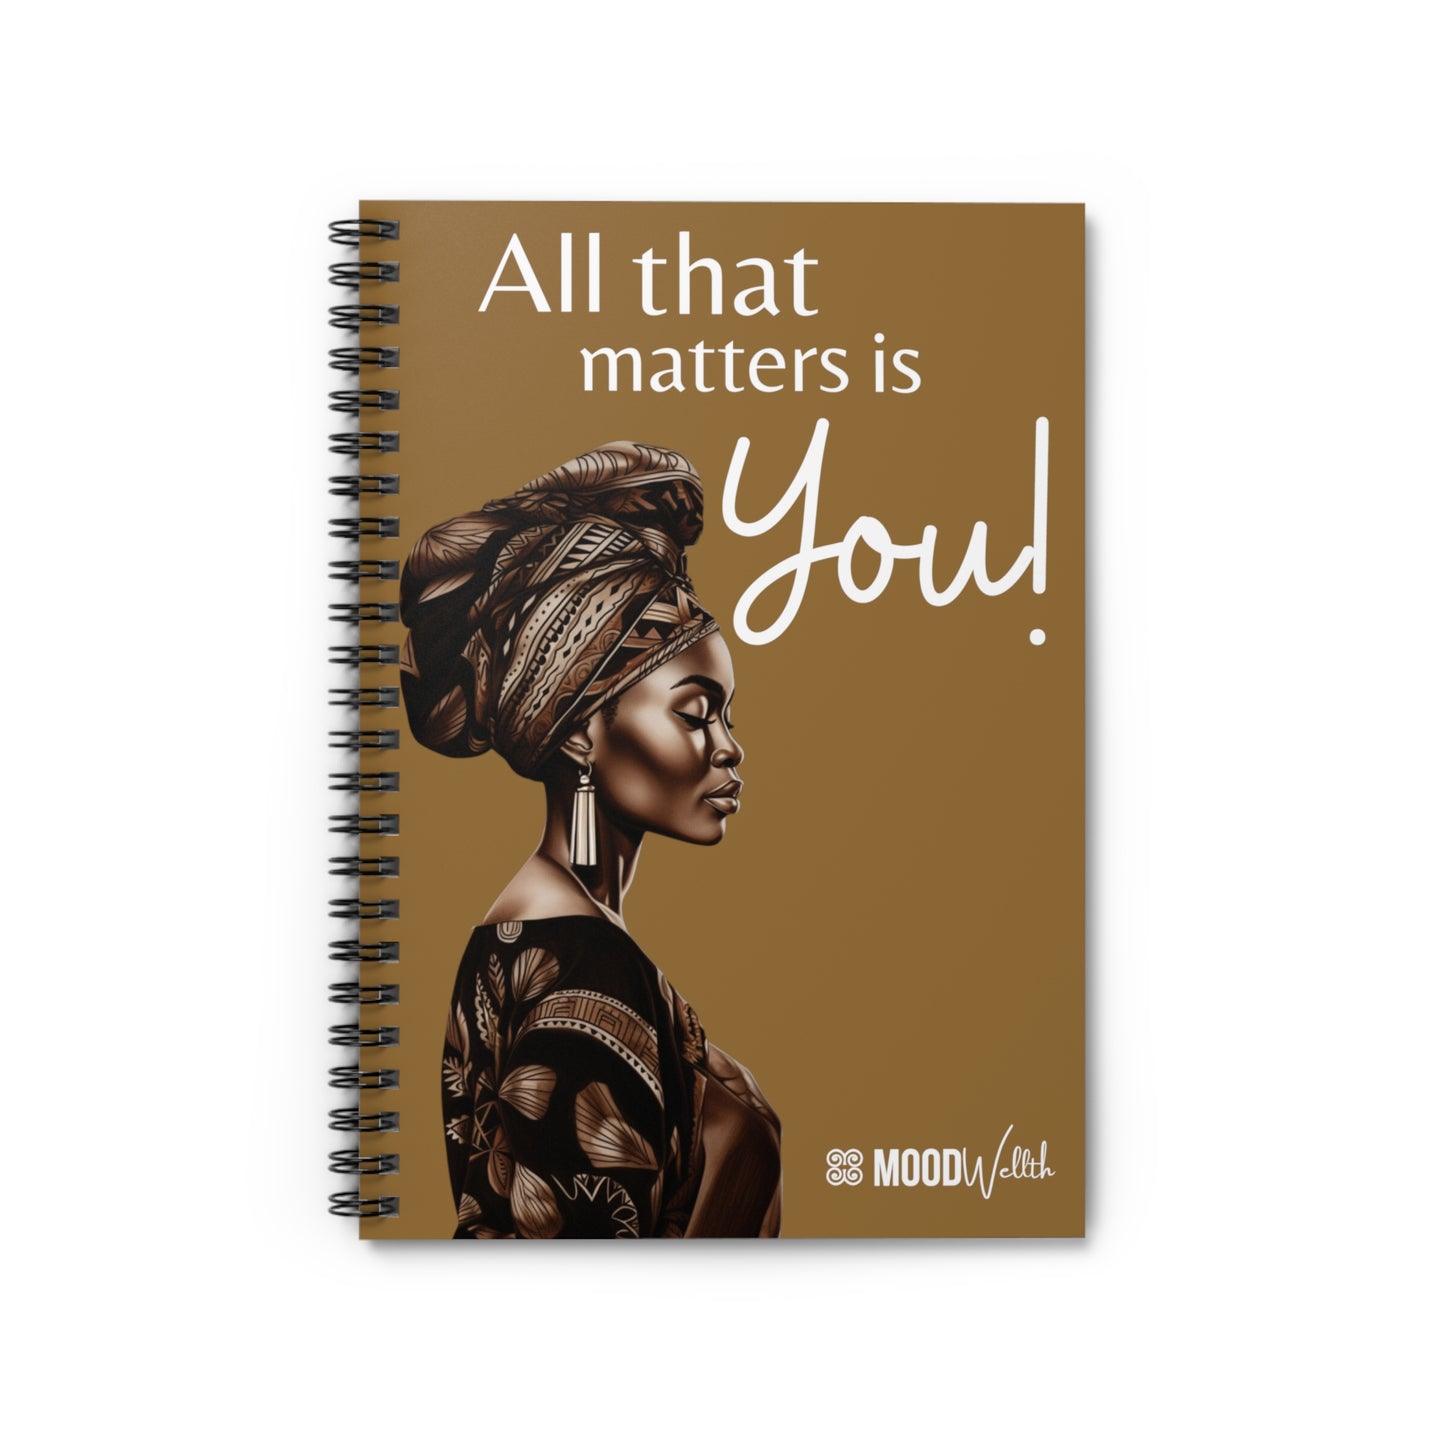 All That Matters Is You! Spiral Notebook